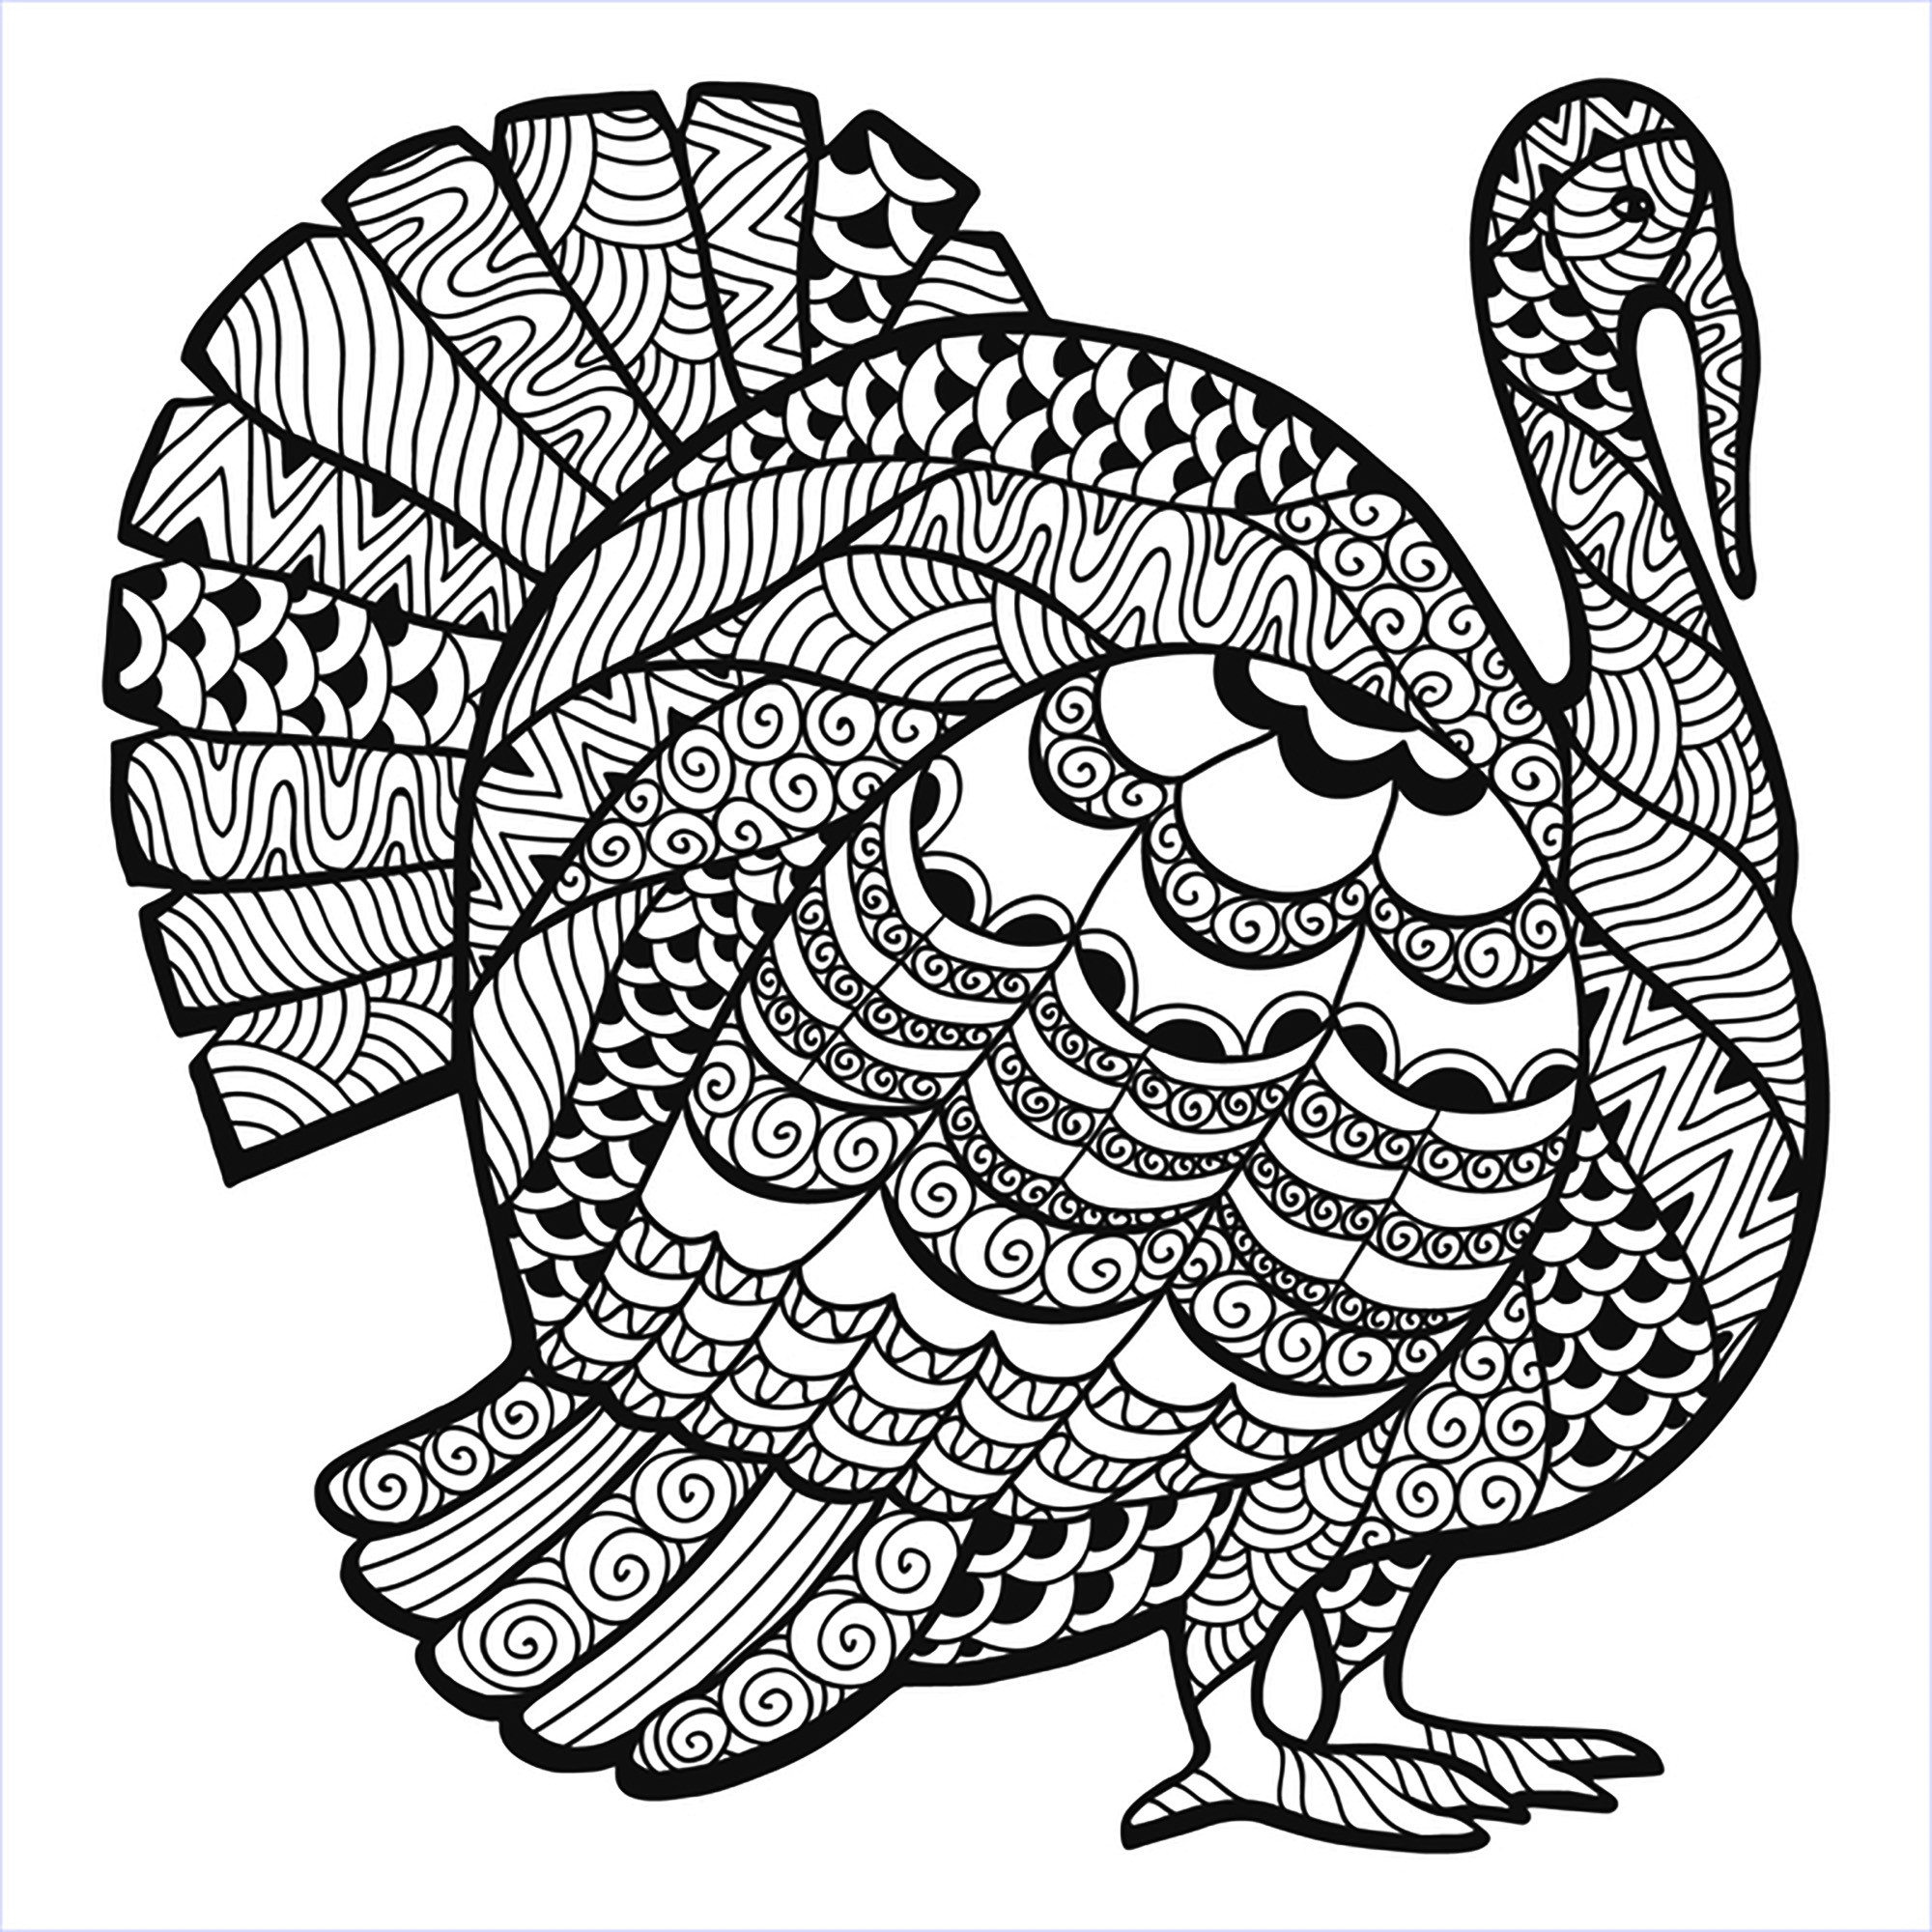 Thanksgiving Turkey Coloring Pages
 Thanksgiving Coloring Pages For Adults to and